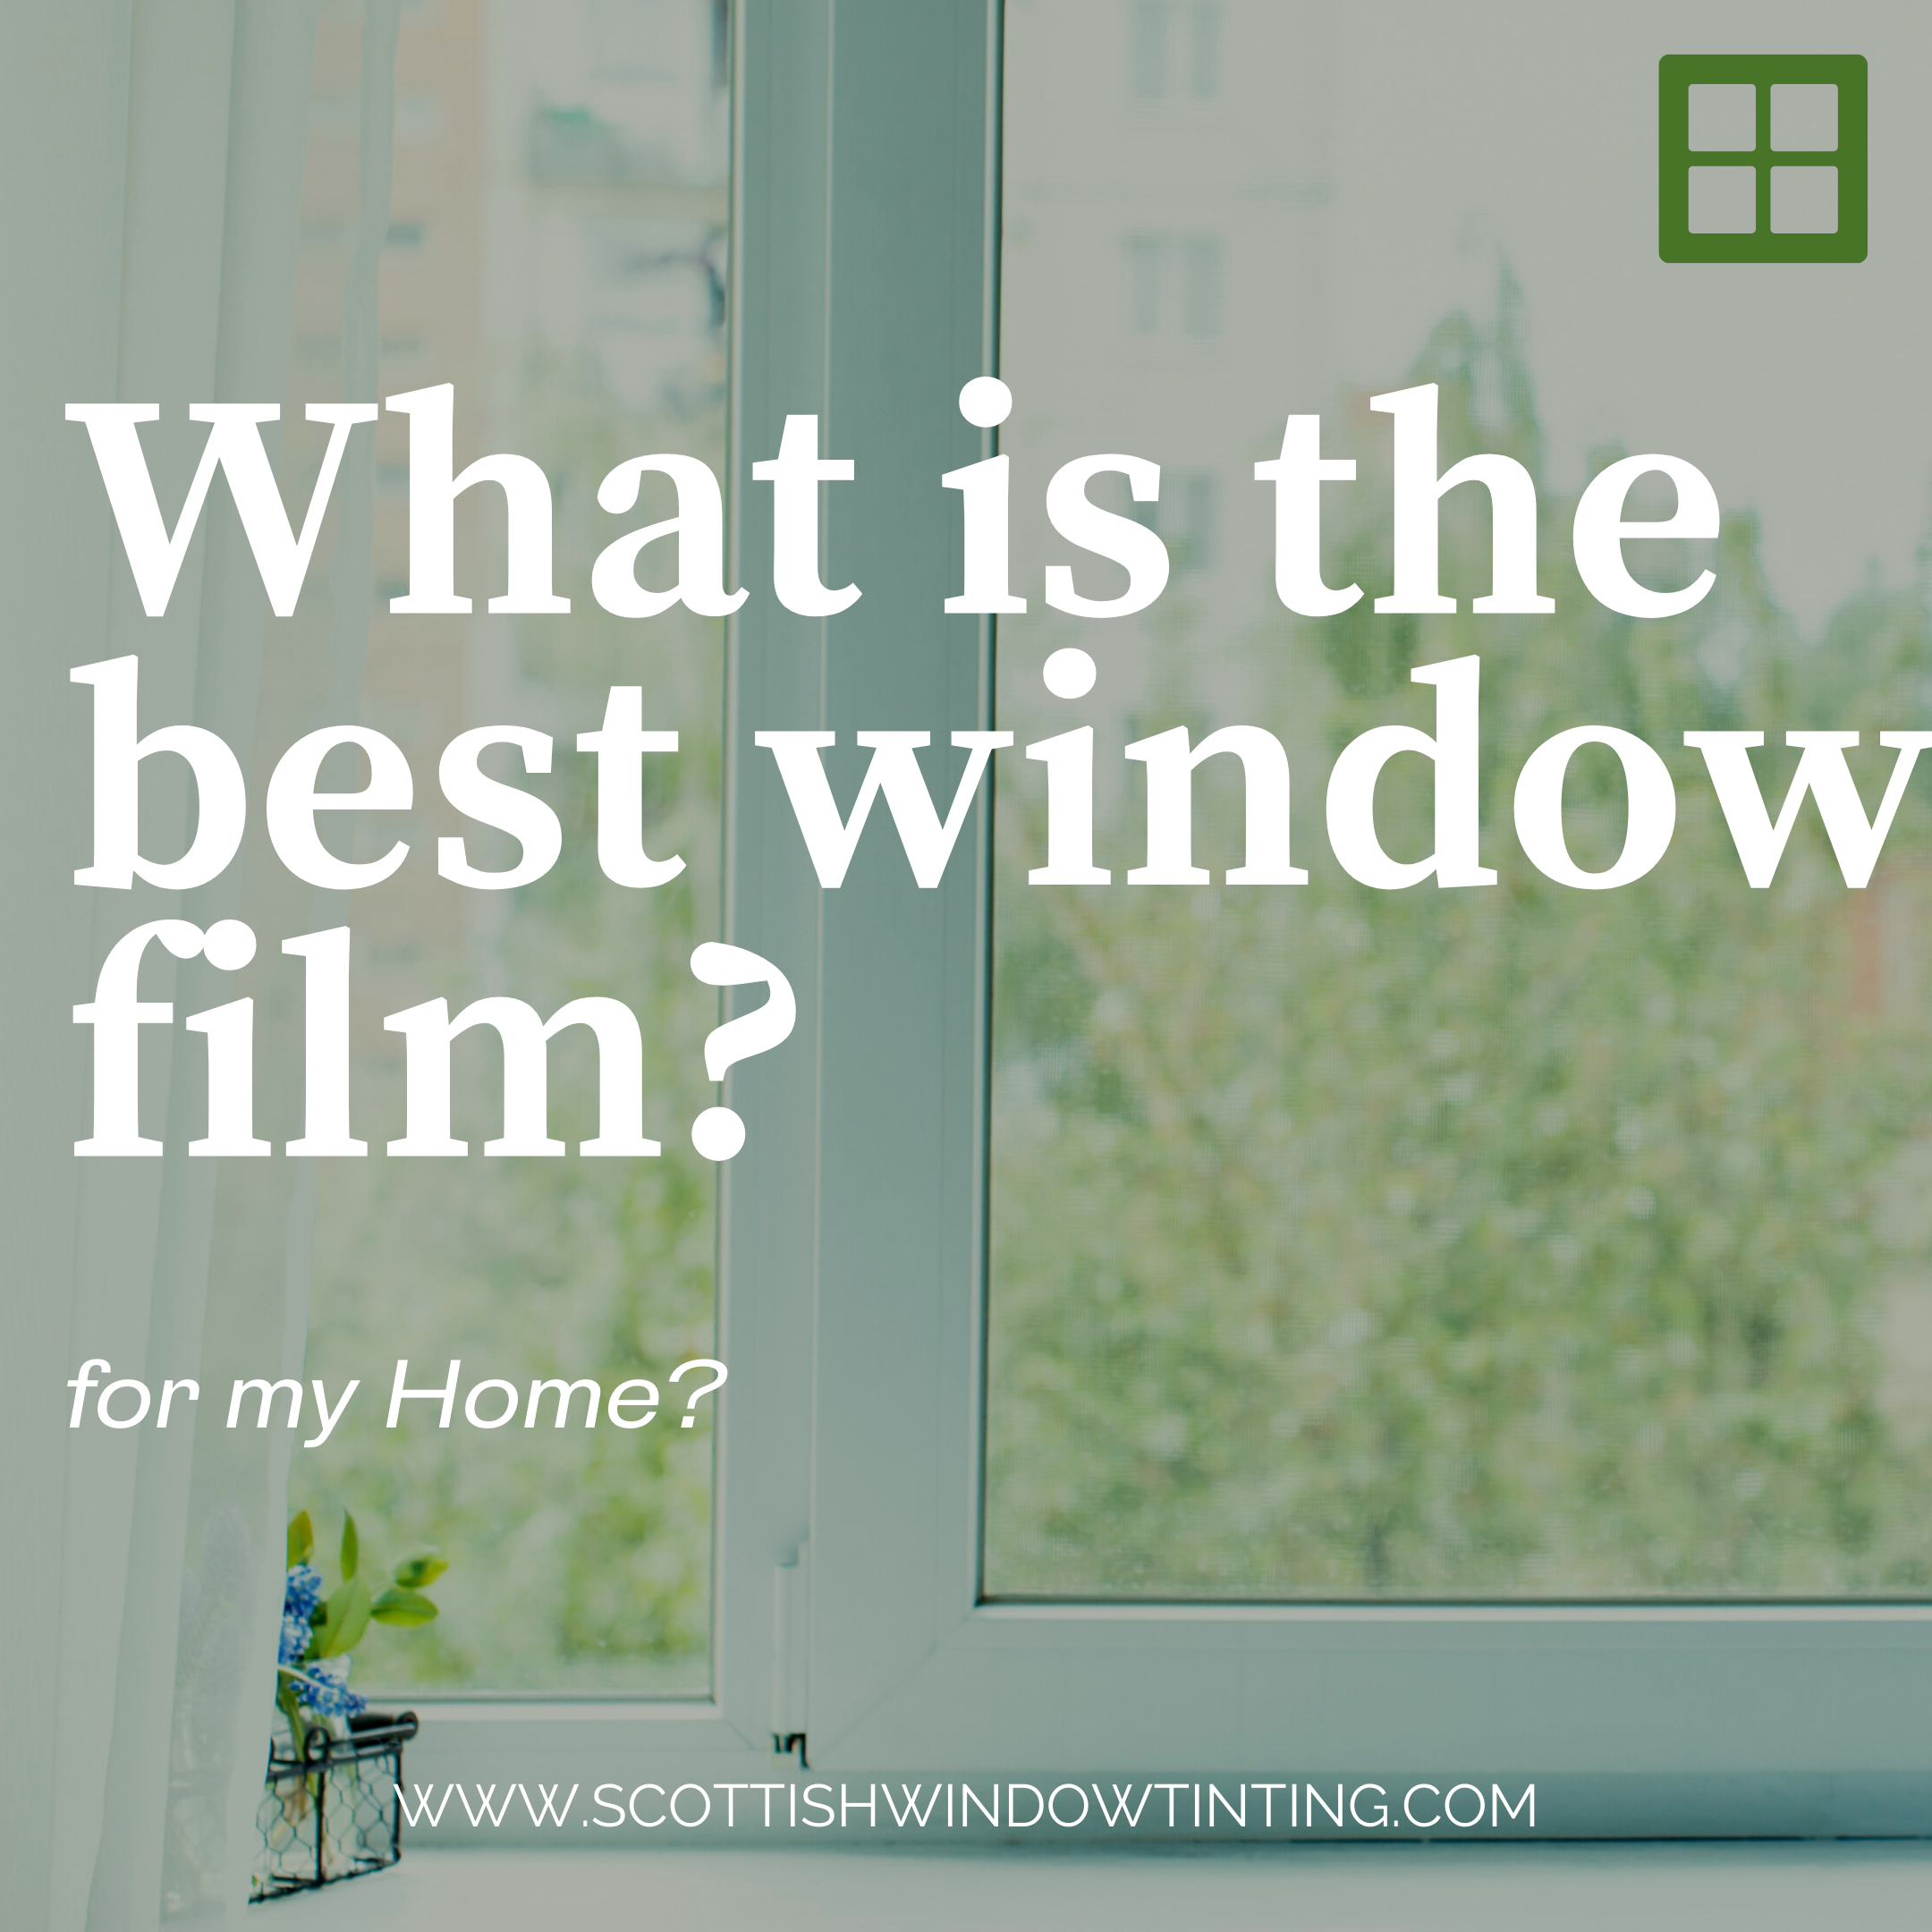 What is the Best Window Film?